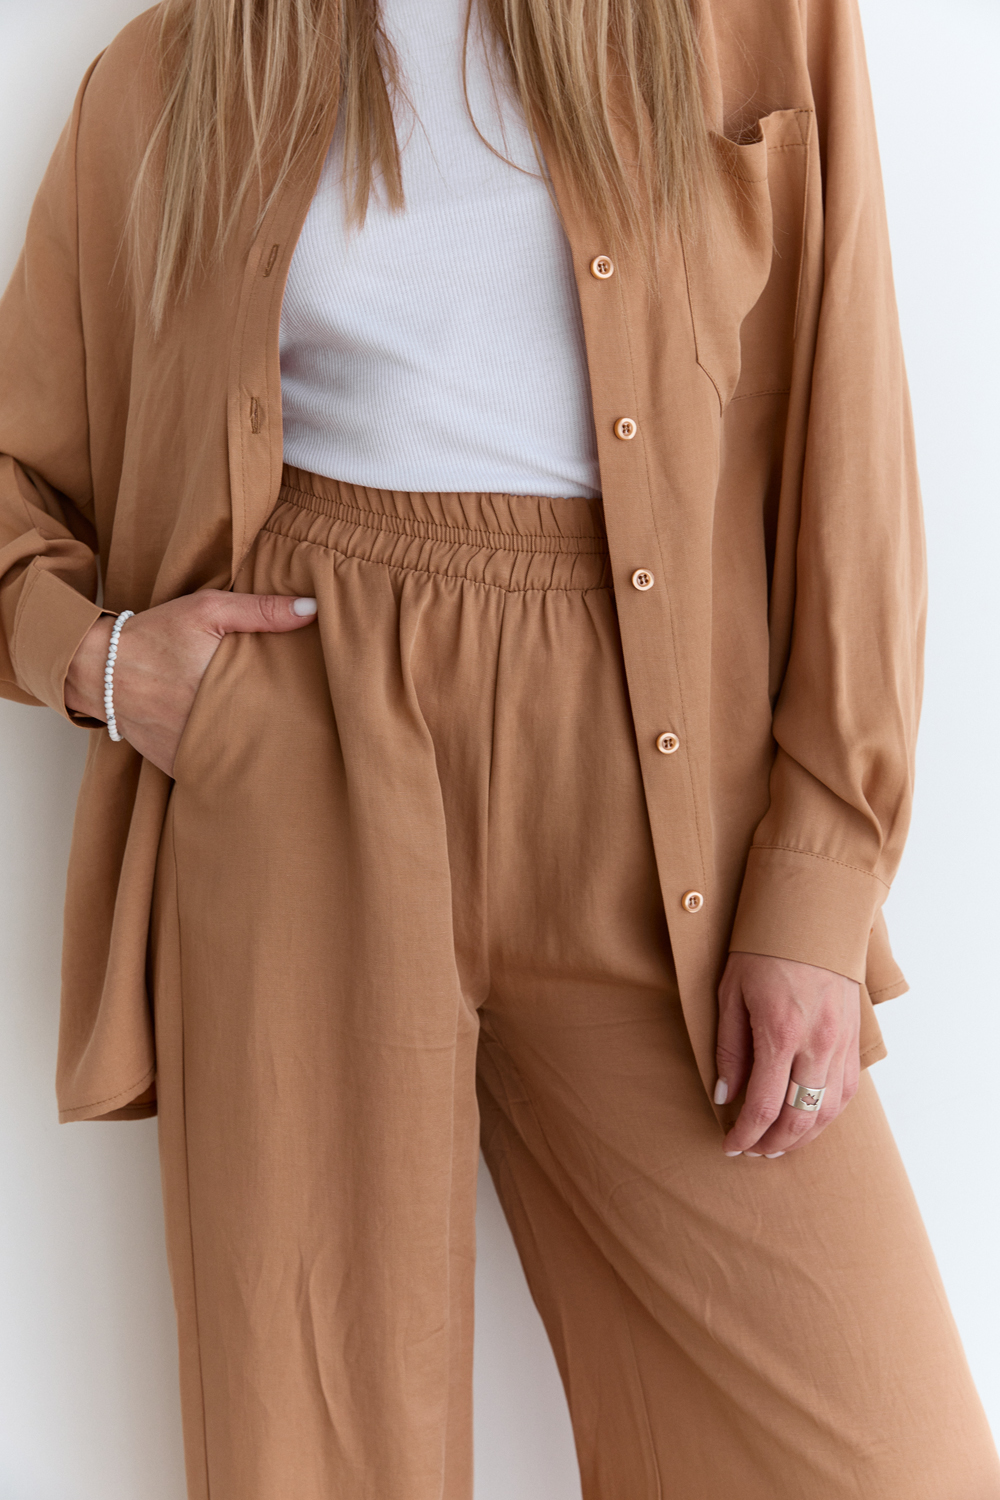 Caramel-colored loose-fitting blouse